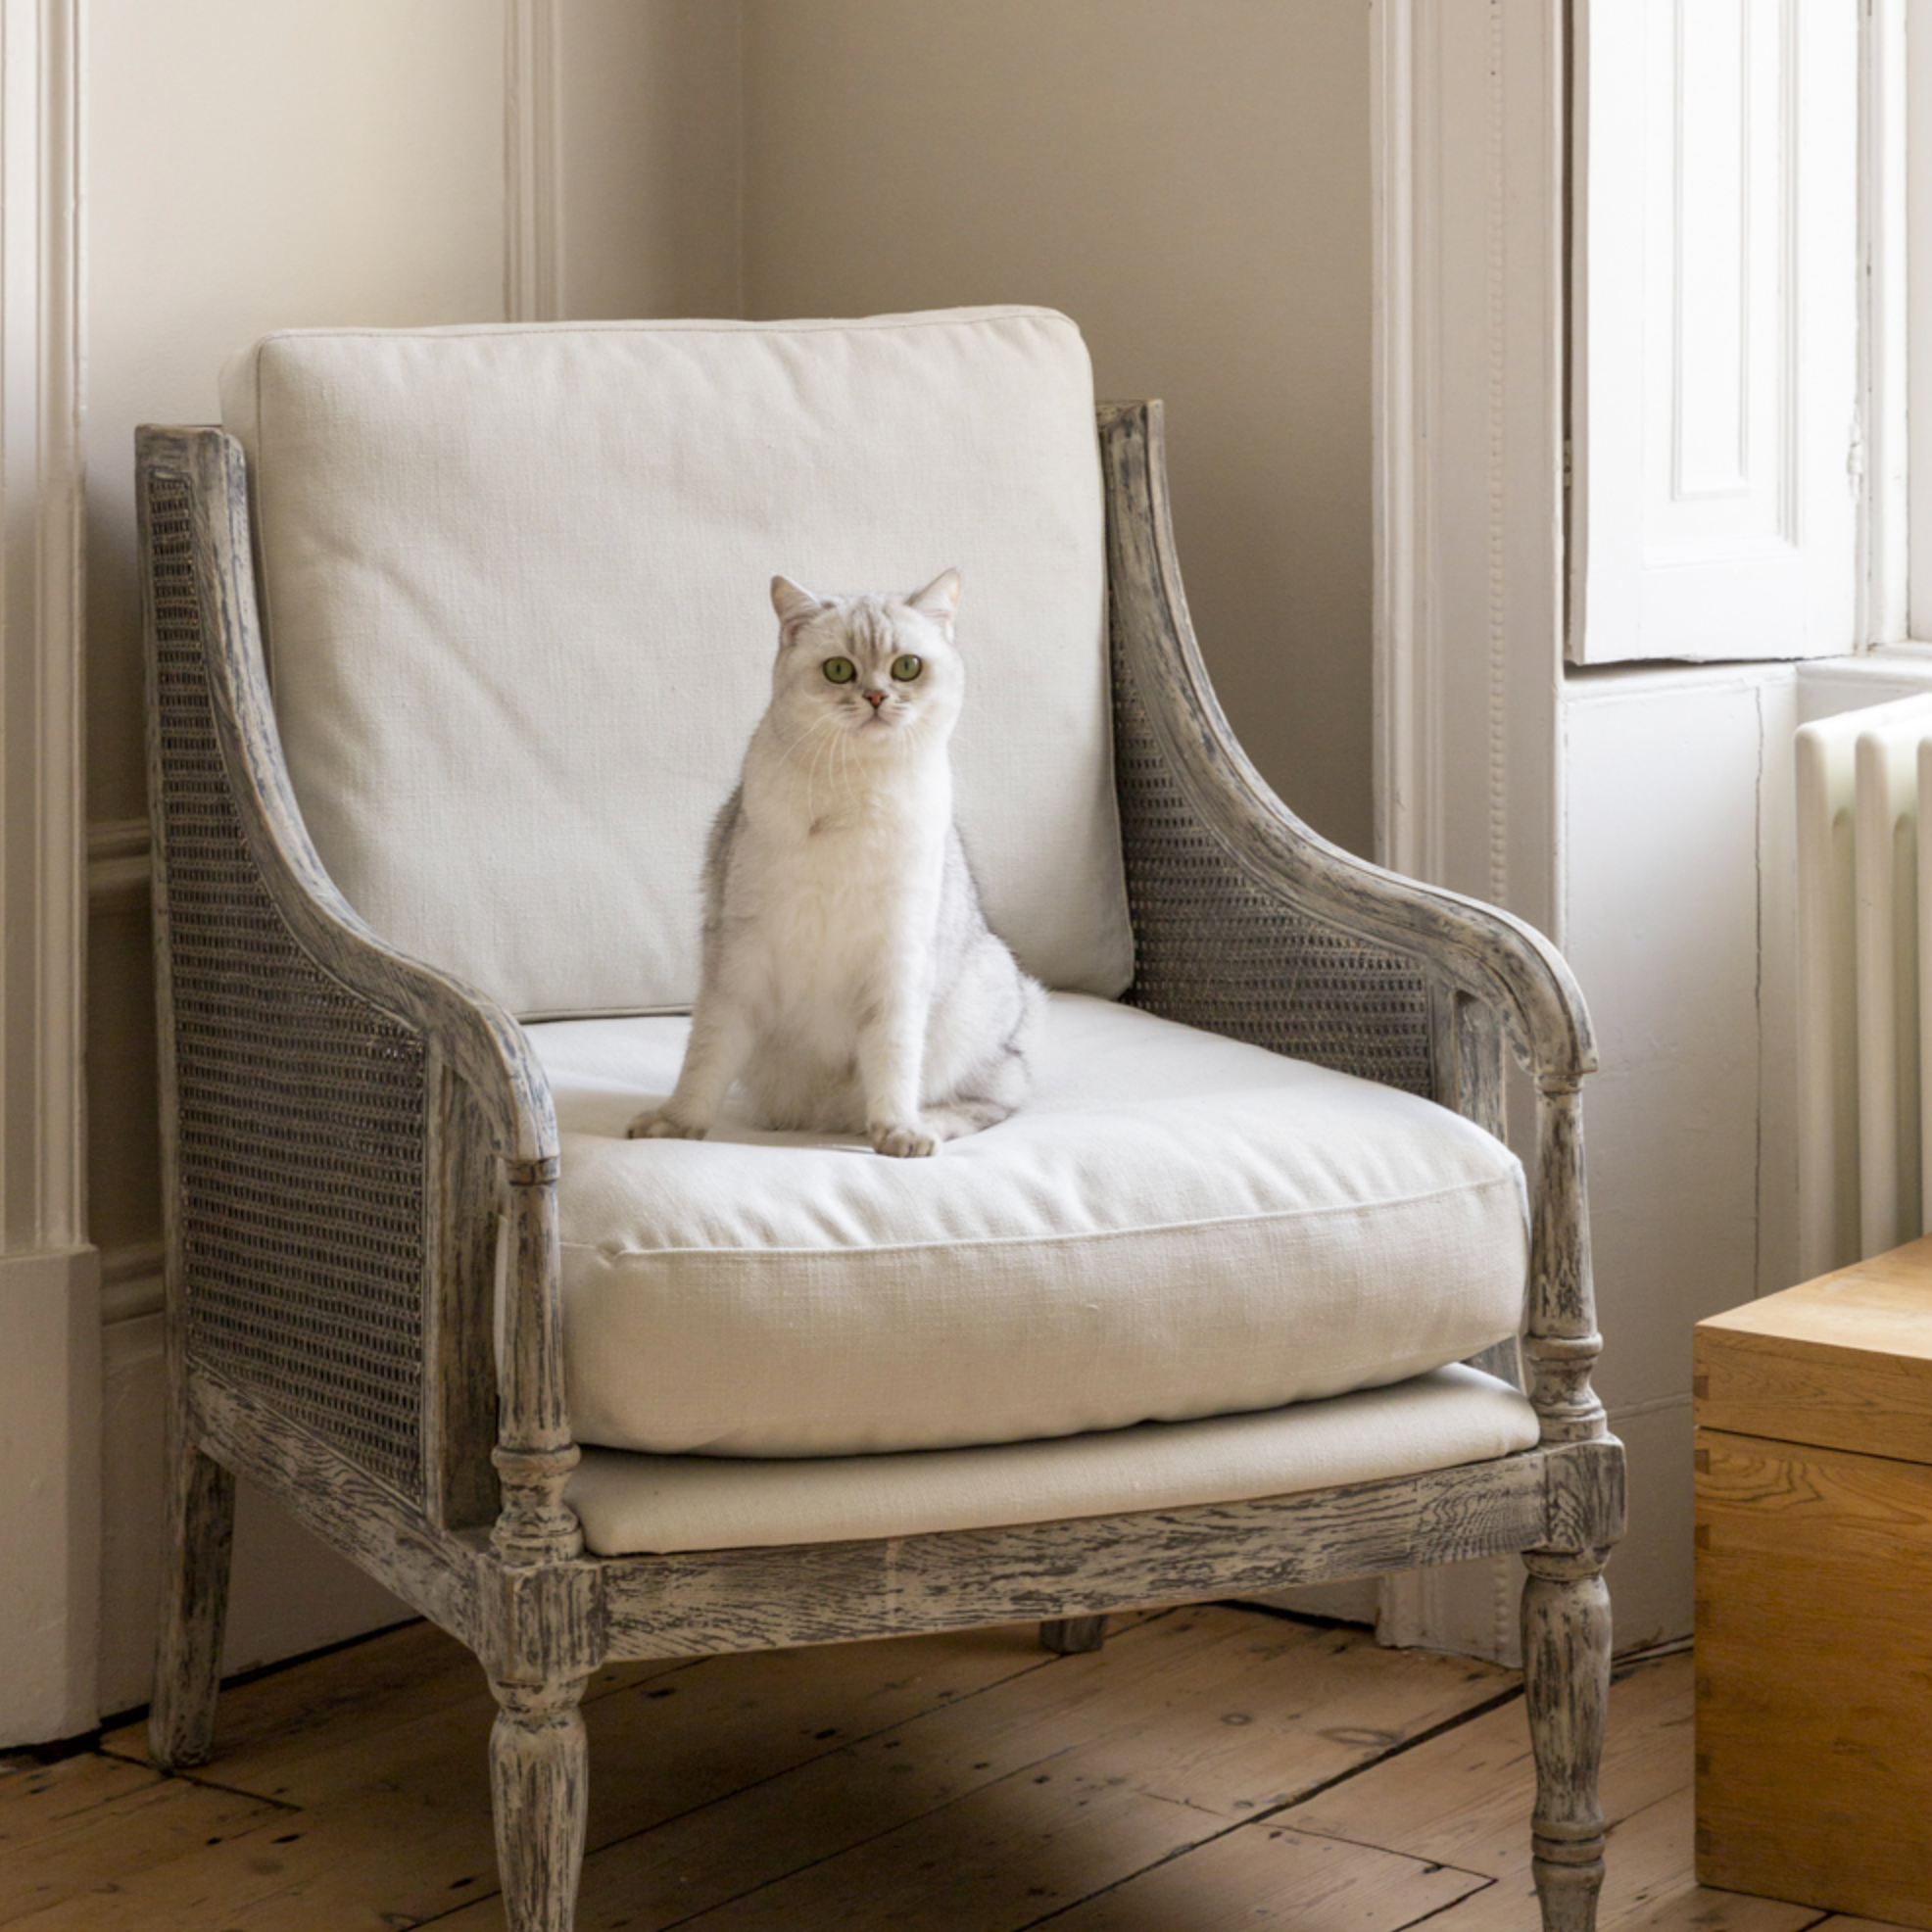  Vintage Rattan Chair with fluffy white cat.